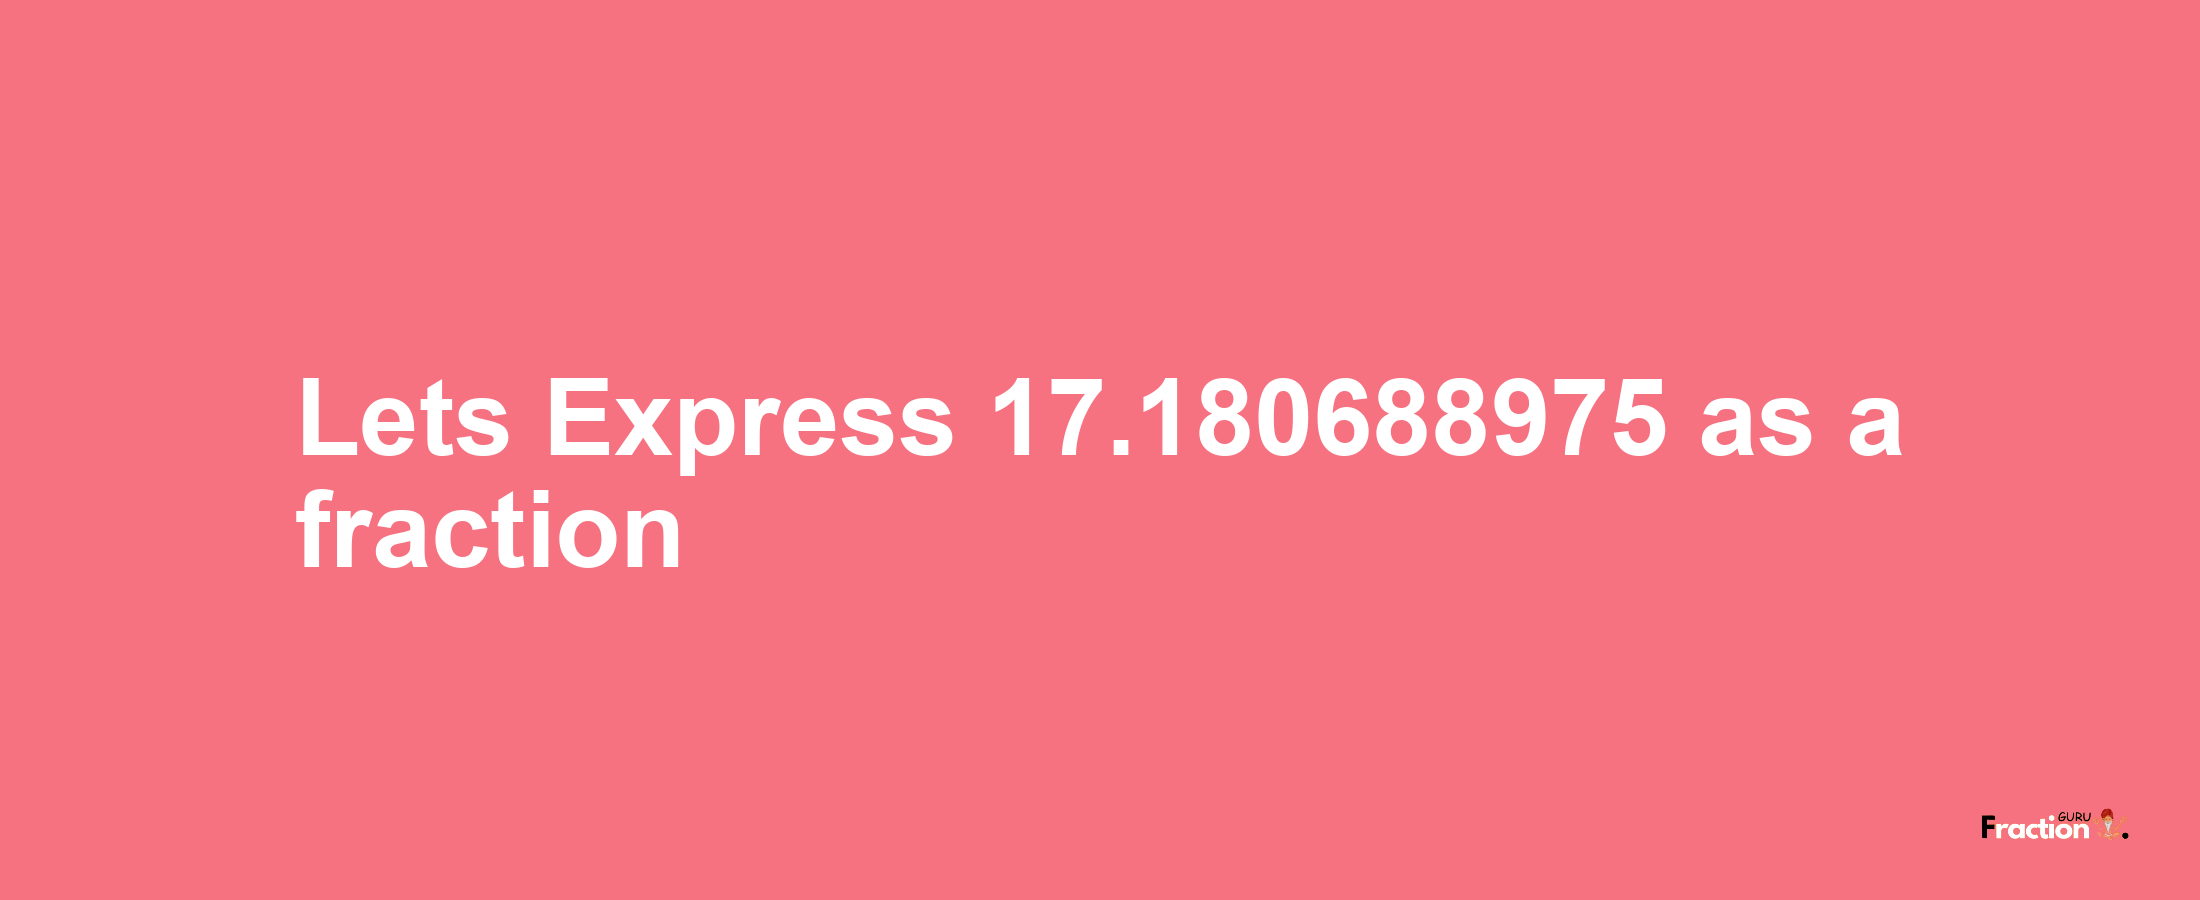 Lets Express 17.180688975 as afraction